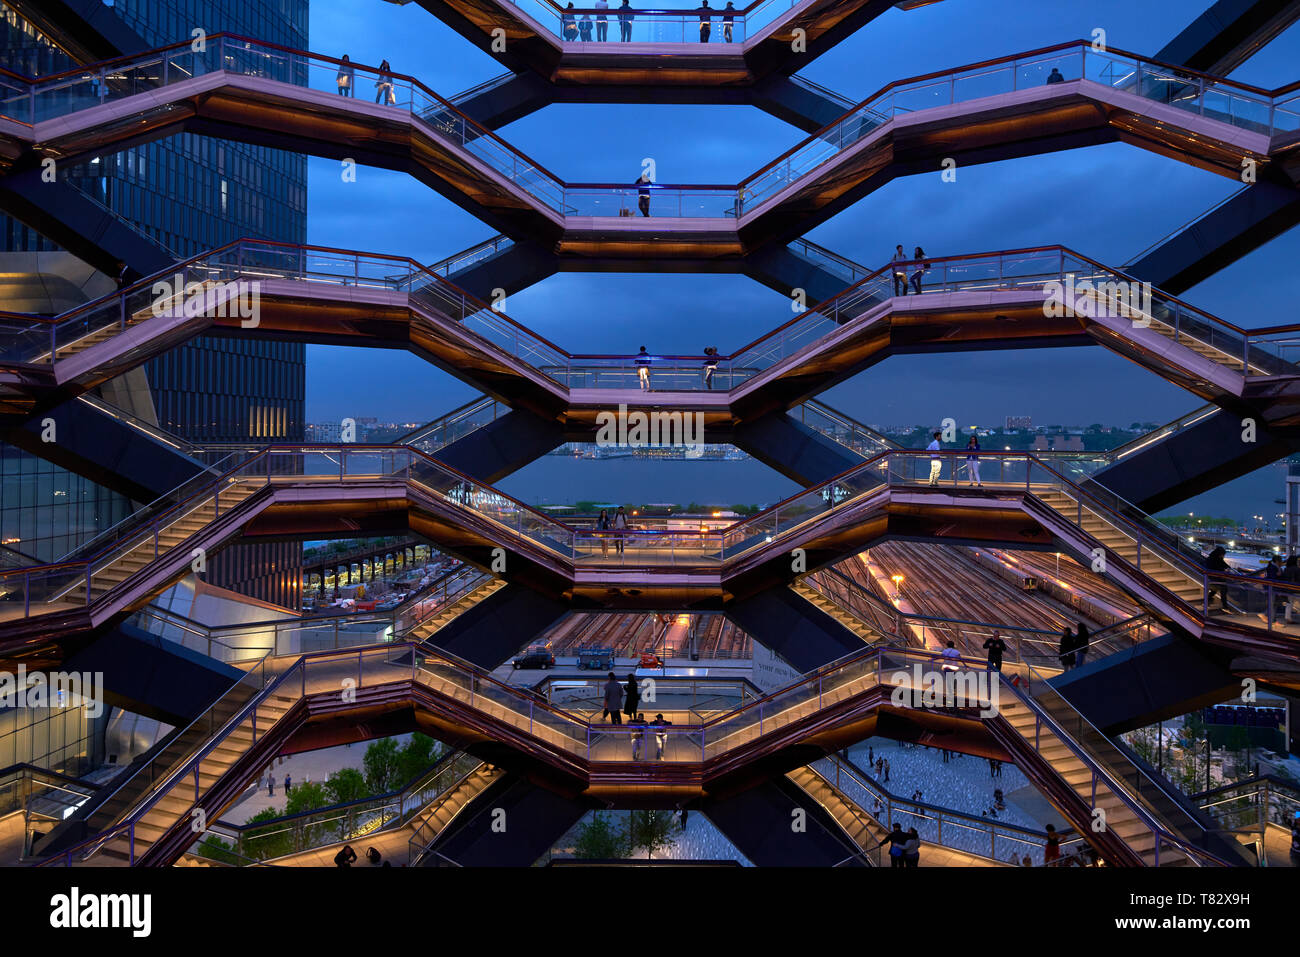 View by dusk Inside the interactive artwork called Vessel at Hudson Yards in new York City Stock Photo